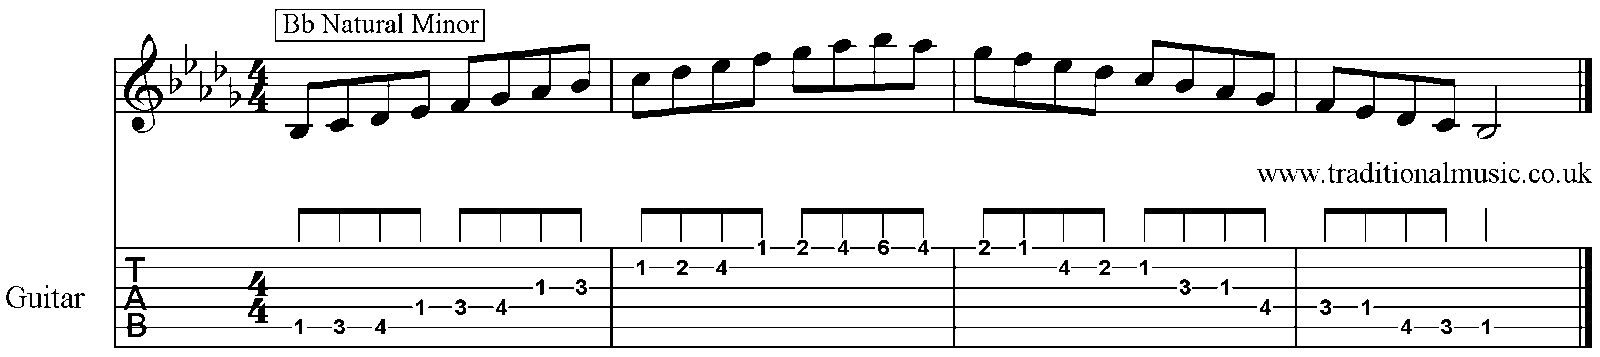 Minor Scales for Guitar Bb 